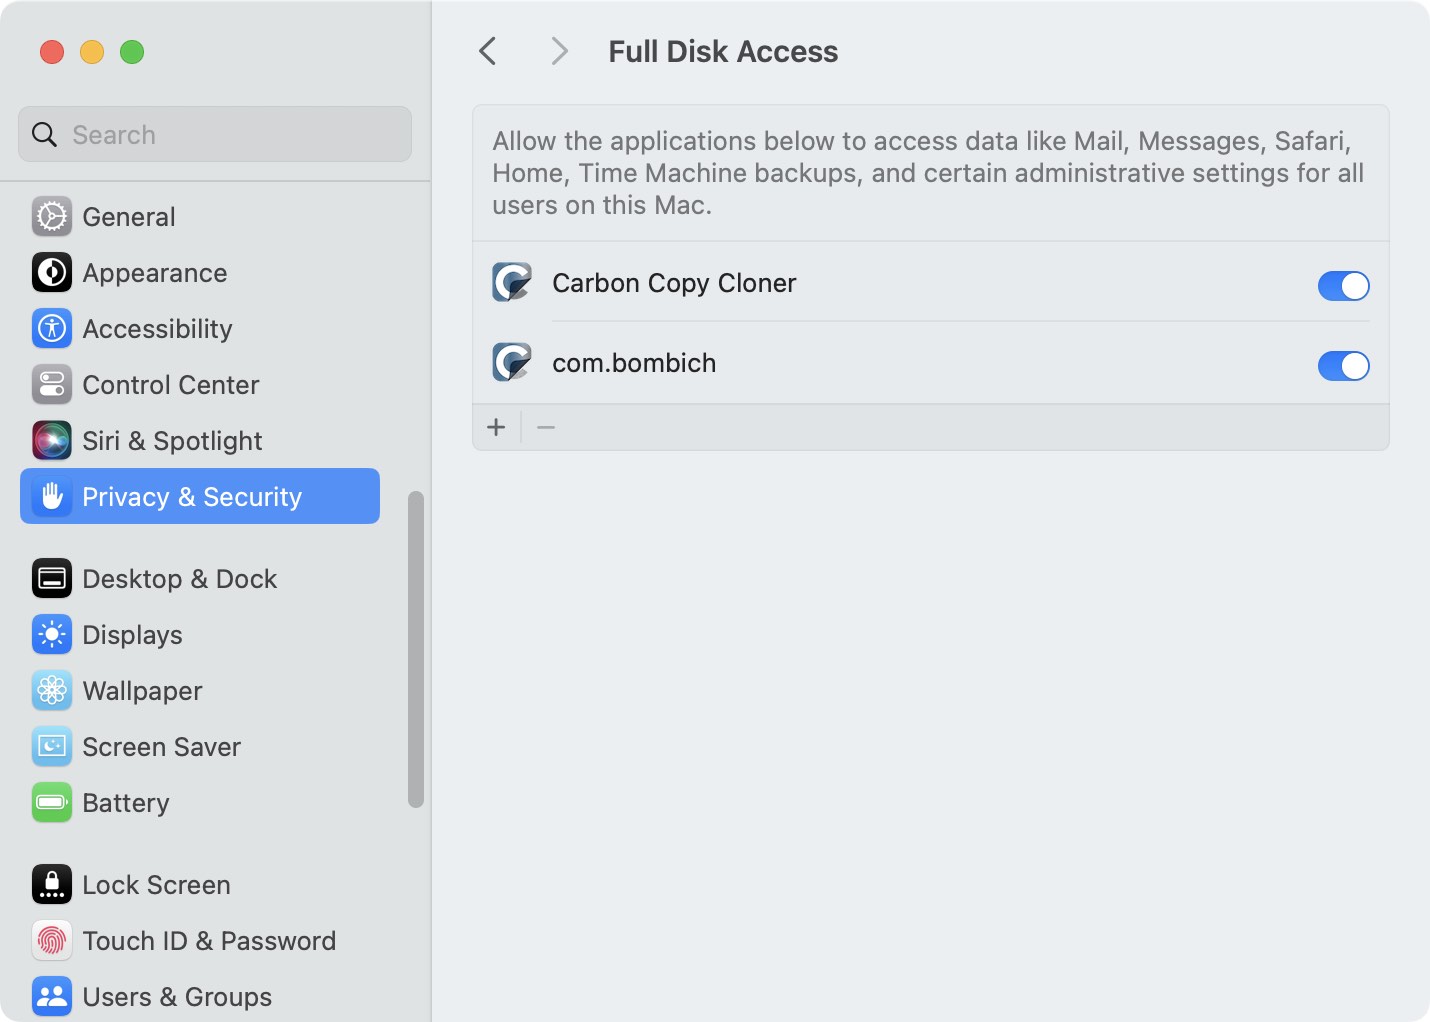 Add com.bombich to the Full Disk Access category